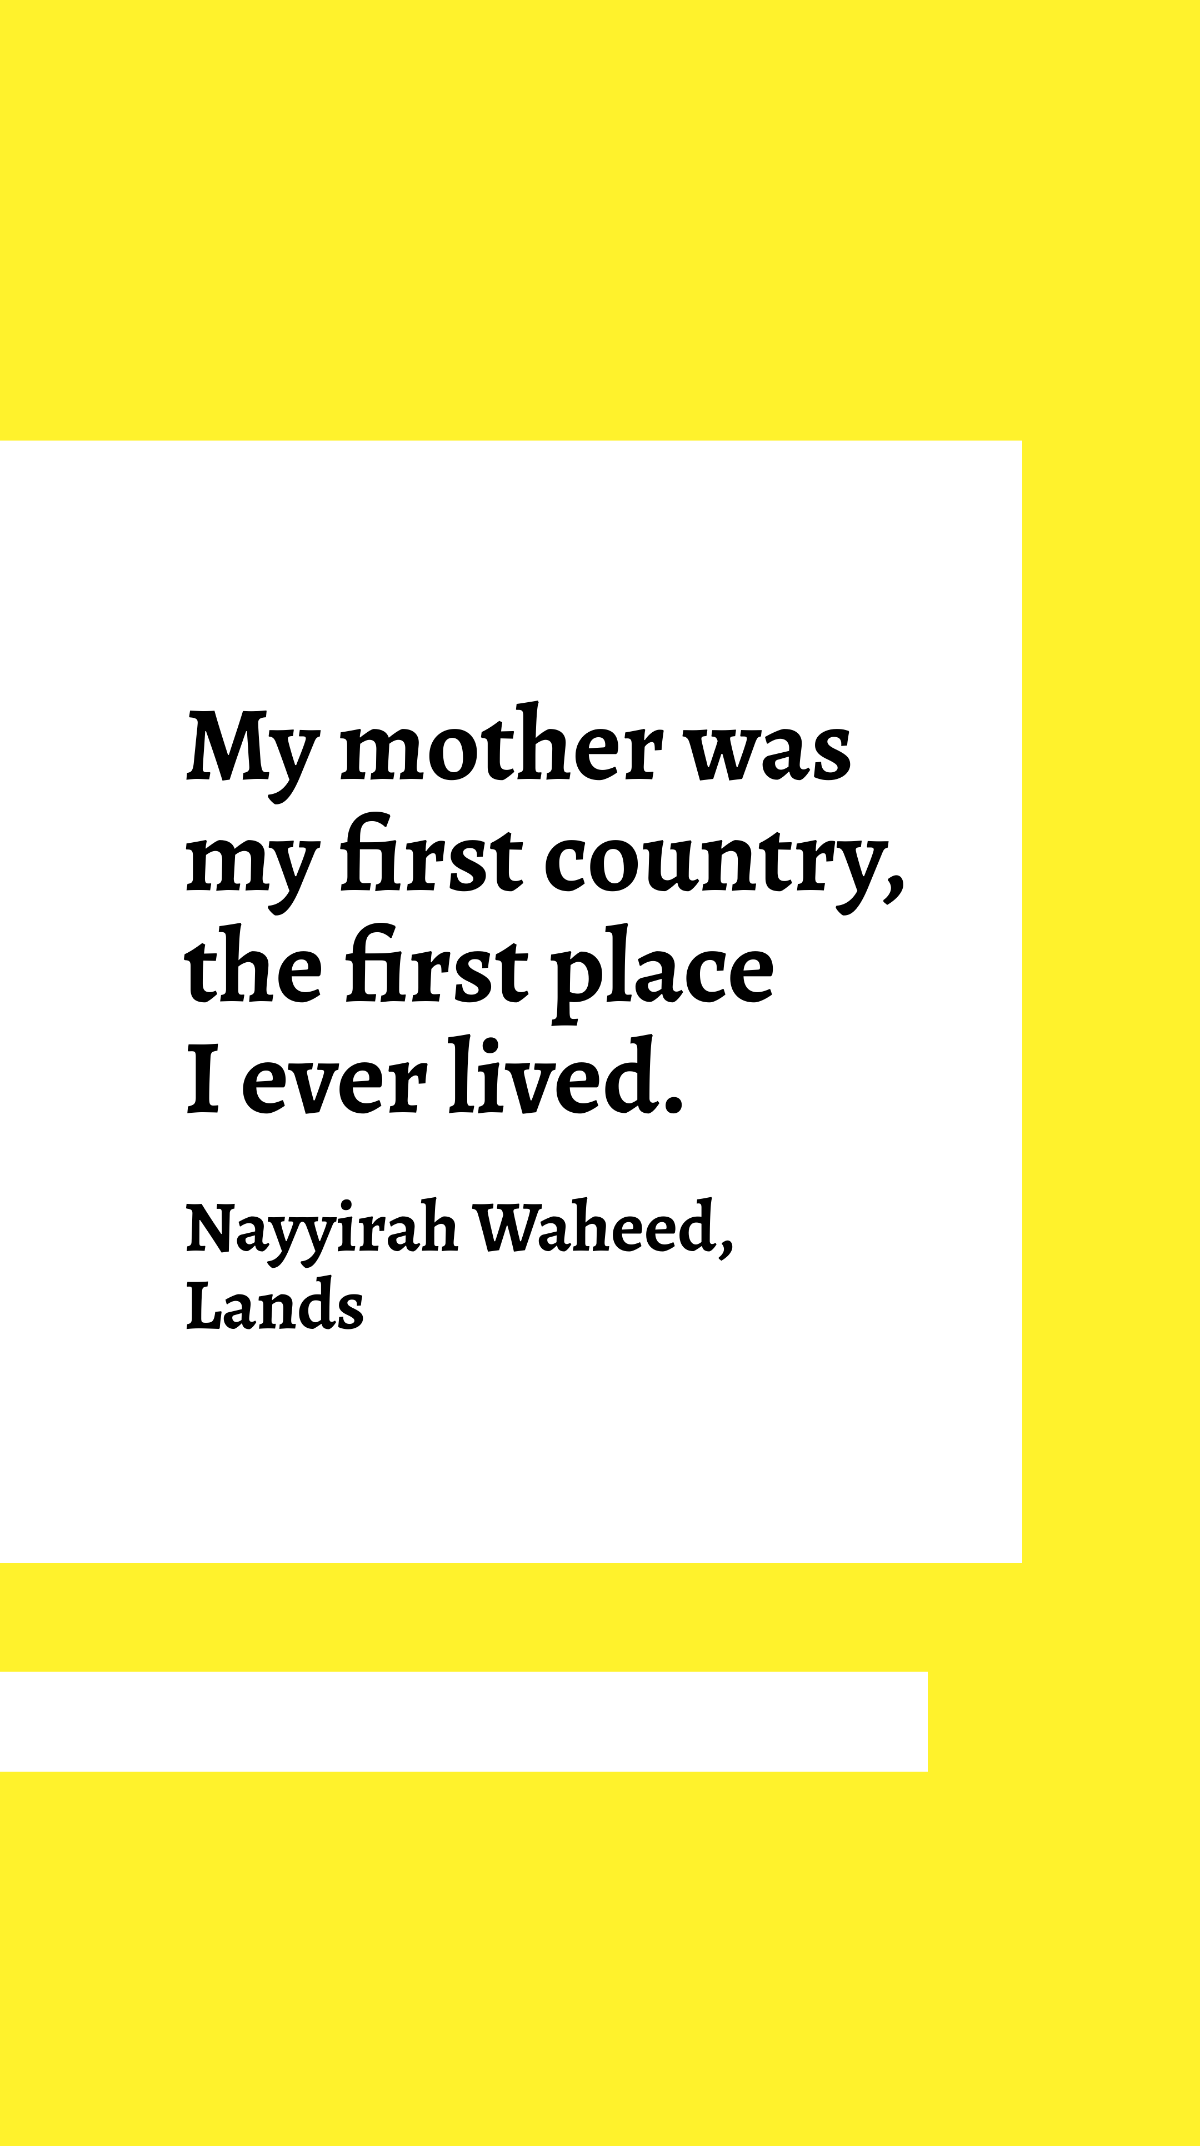 Nayyirah Waheed, Lands - My mother was my first country, the first place I ever lived. Template